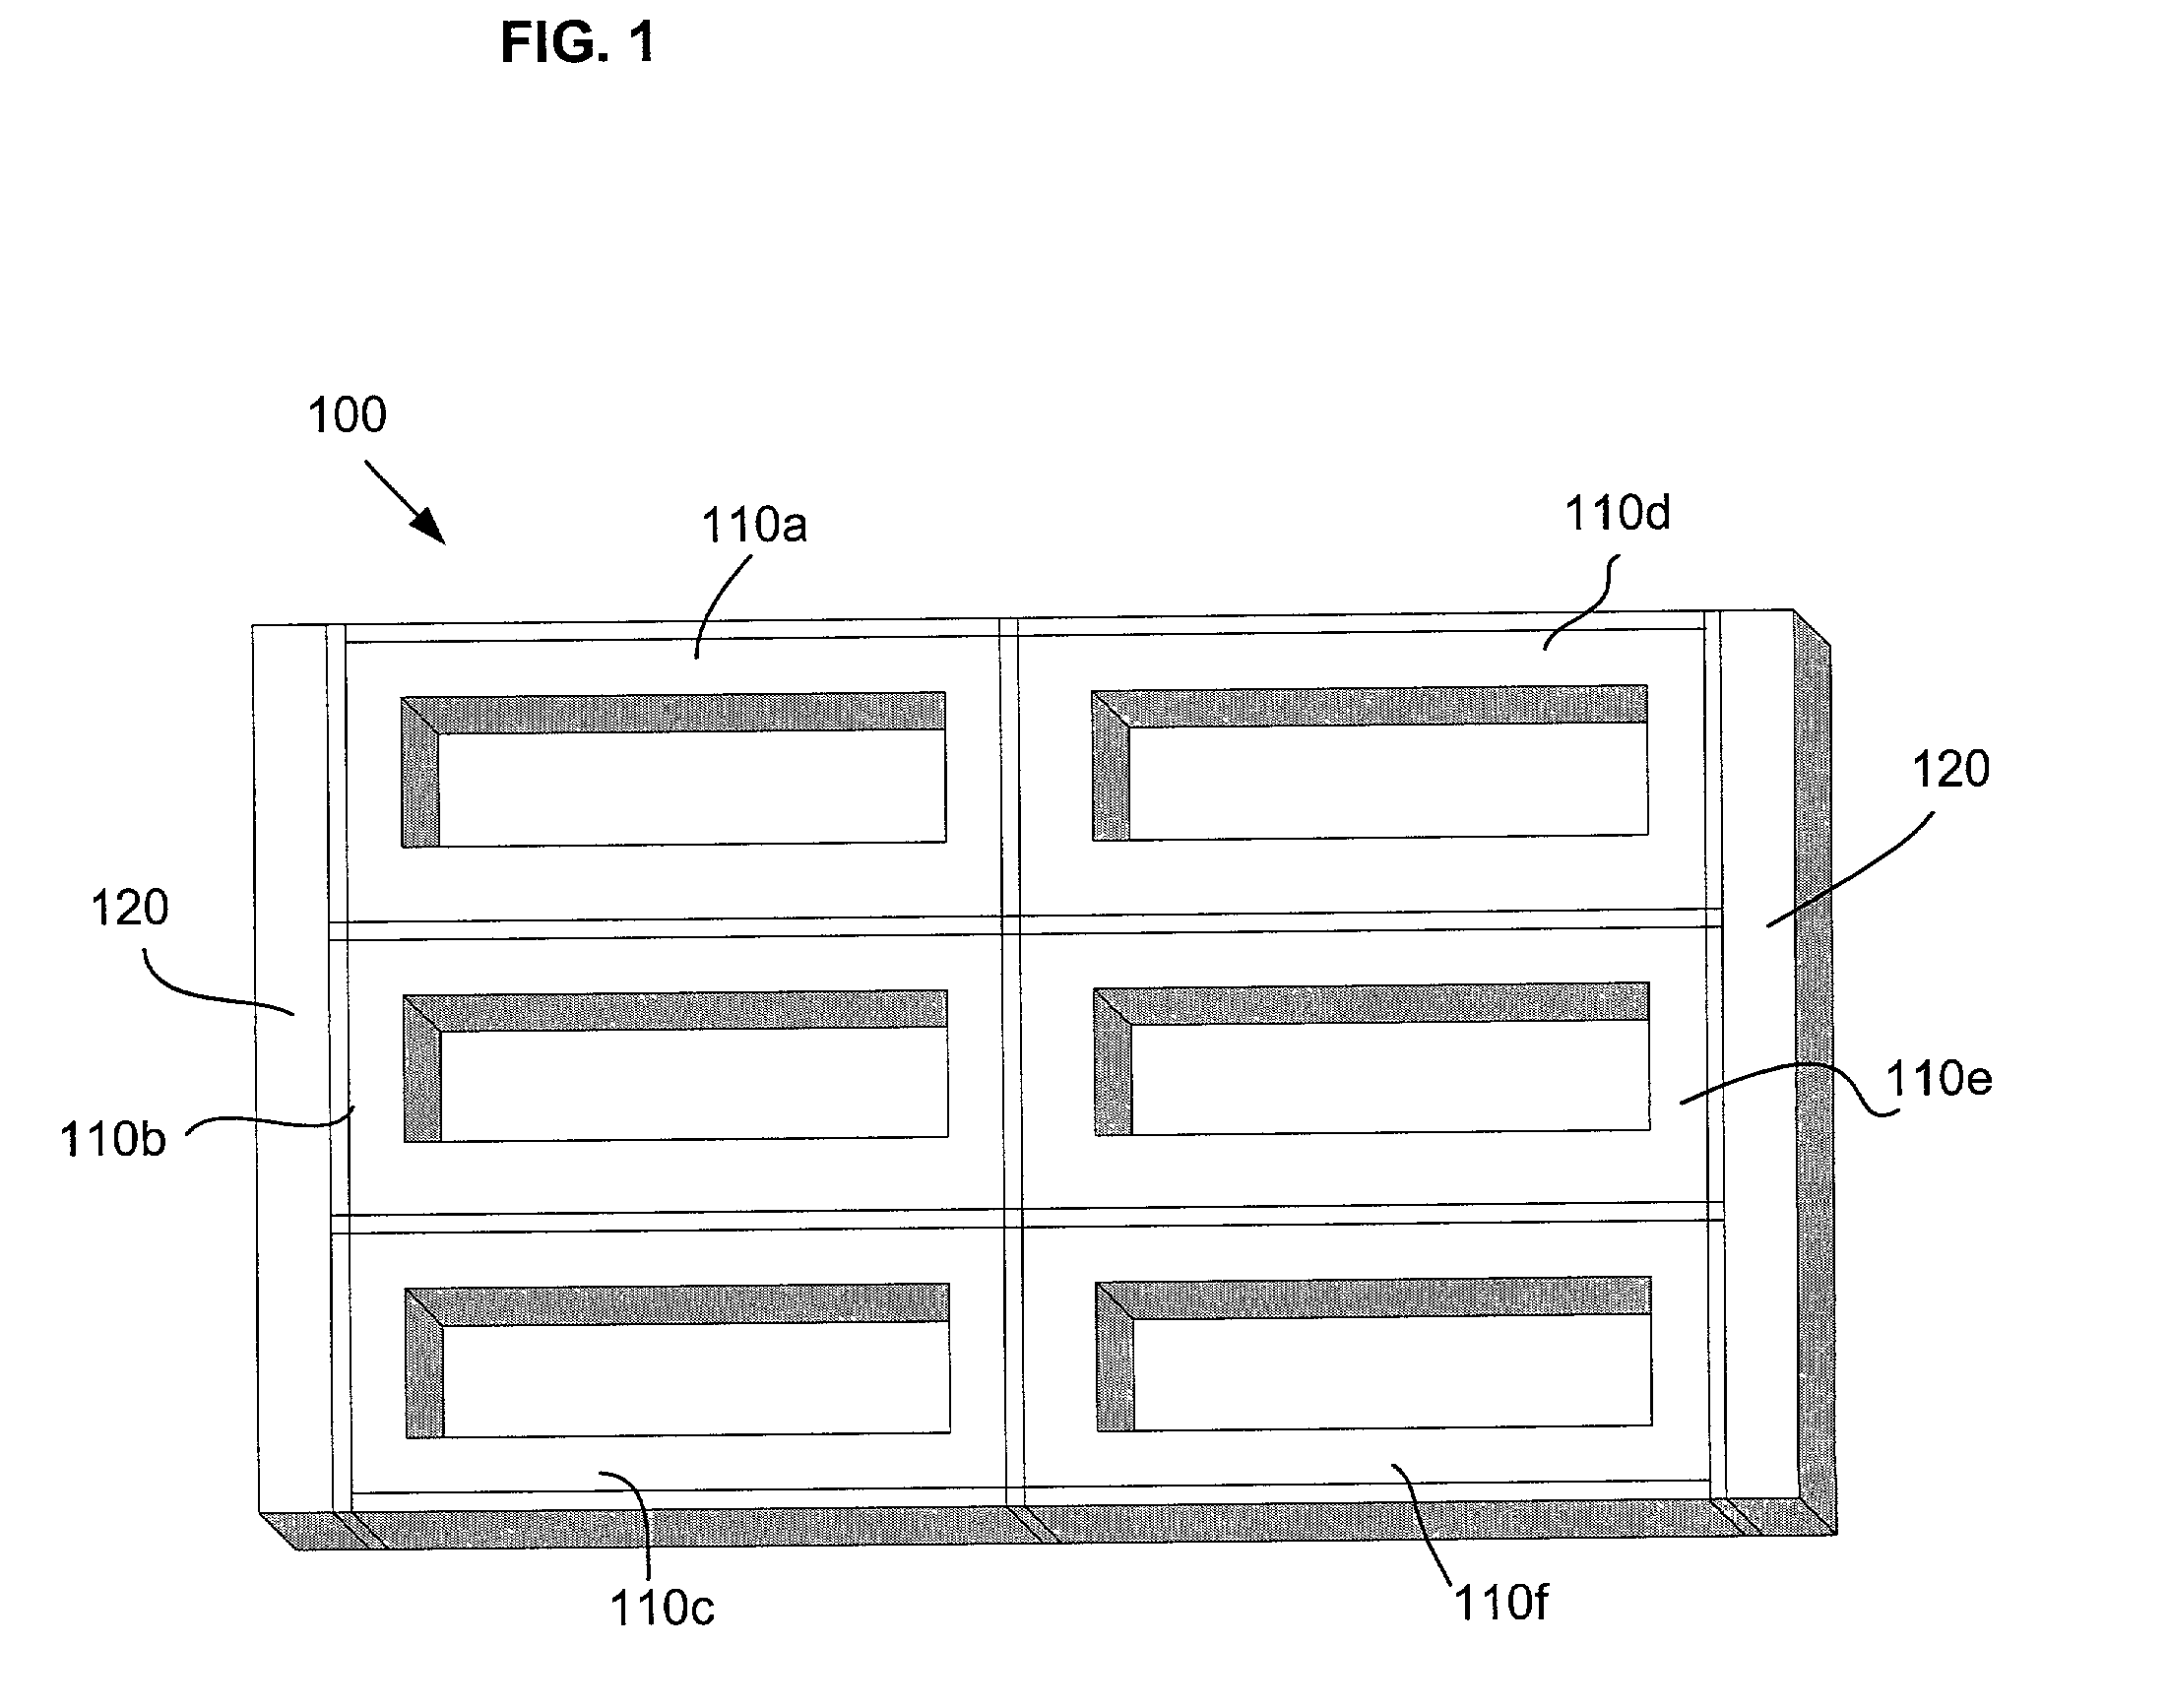 Workpiece distribution and processing in a high throughput stacked frame